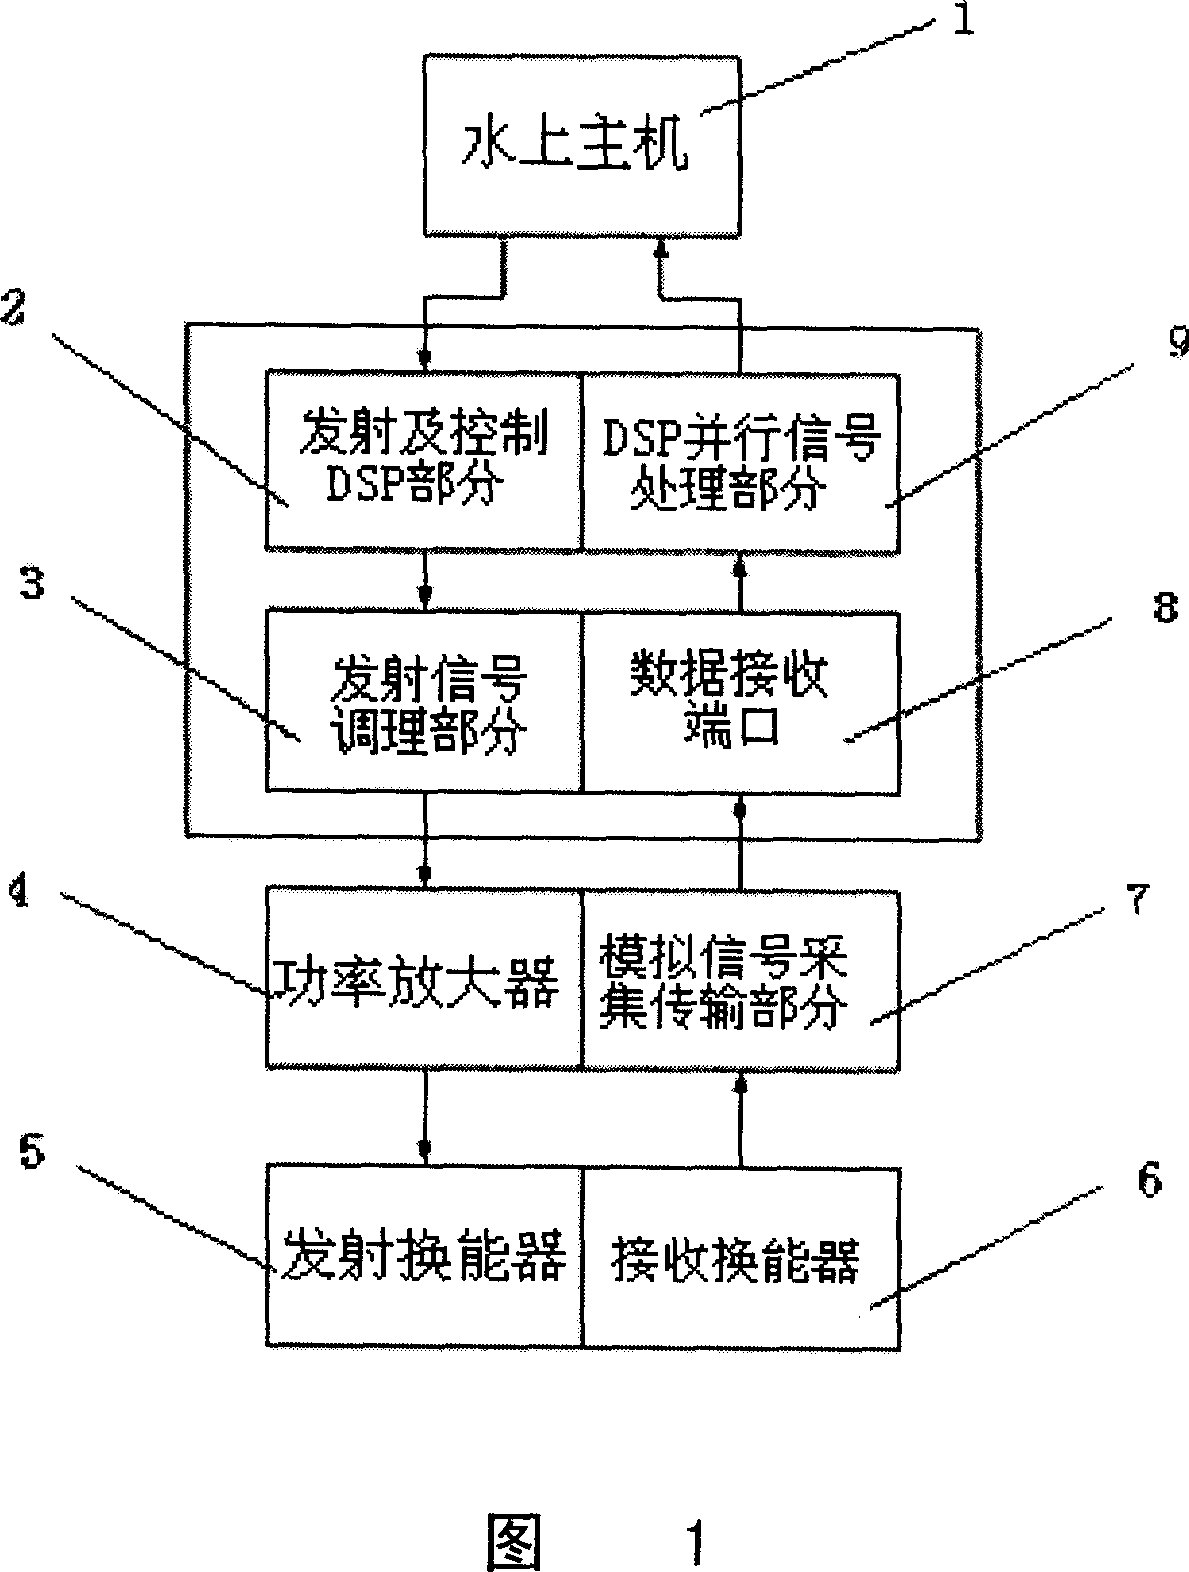 Multiple beam section sonar signal processing device